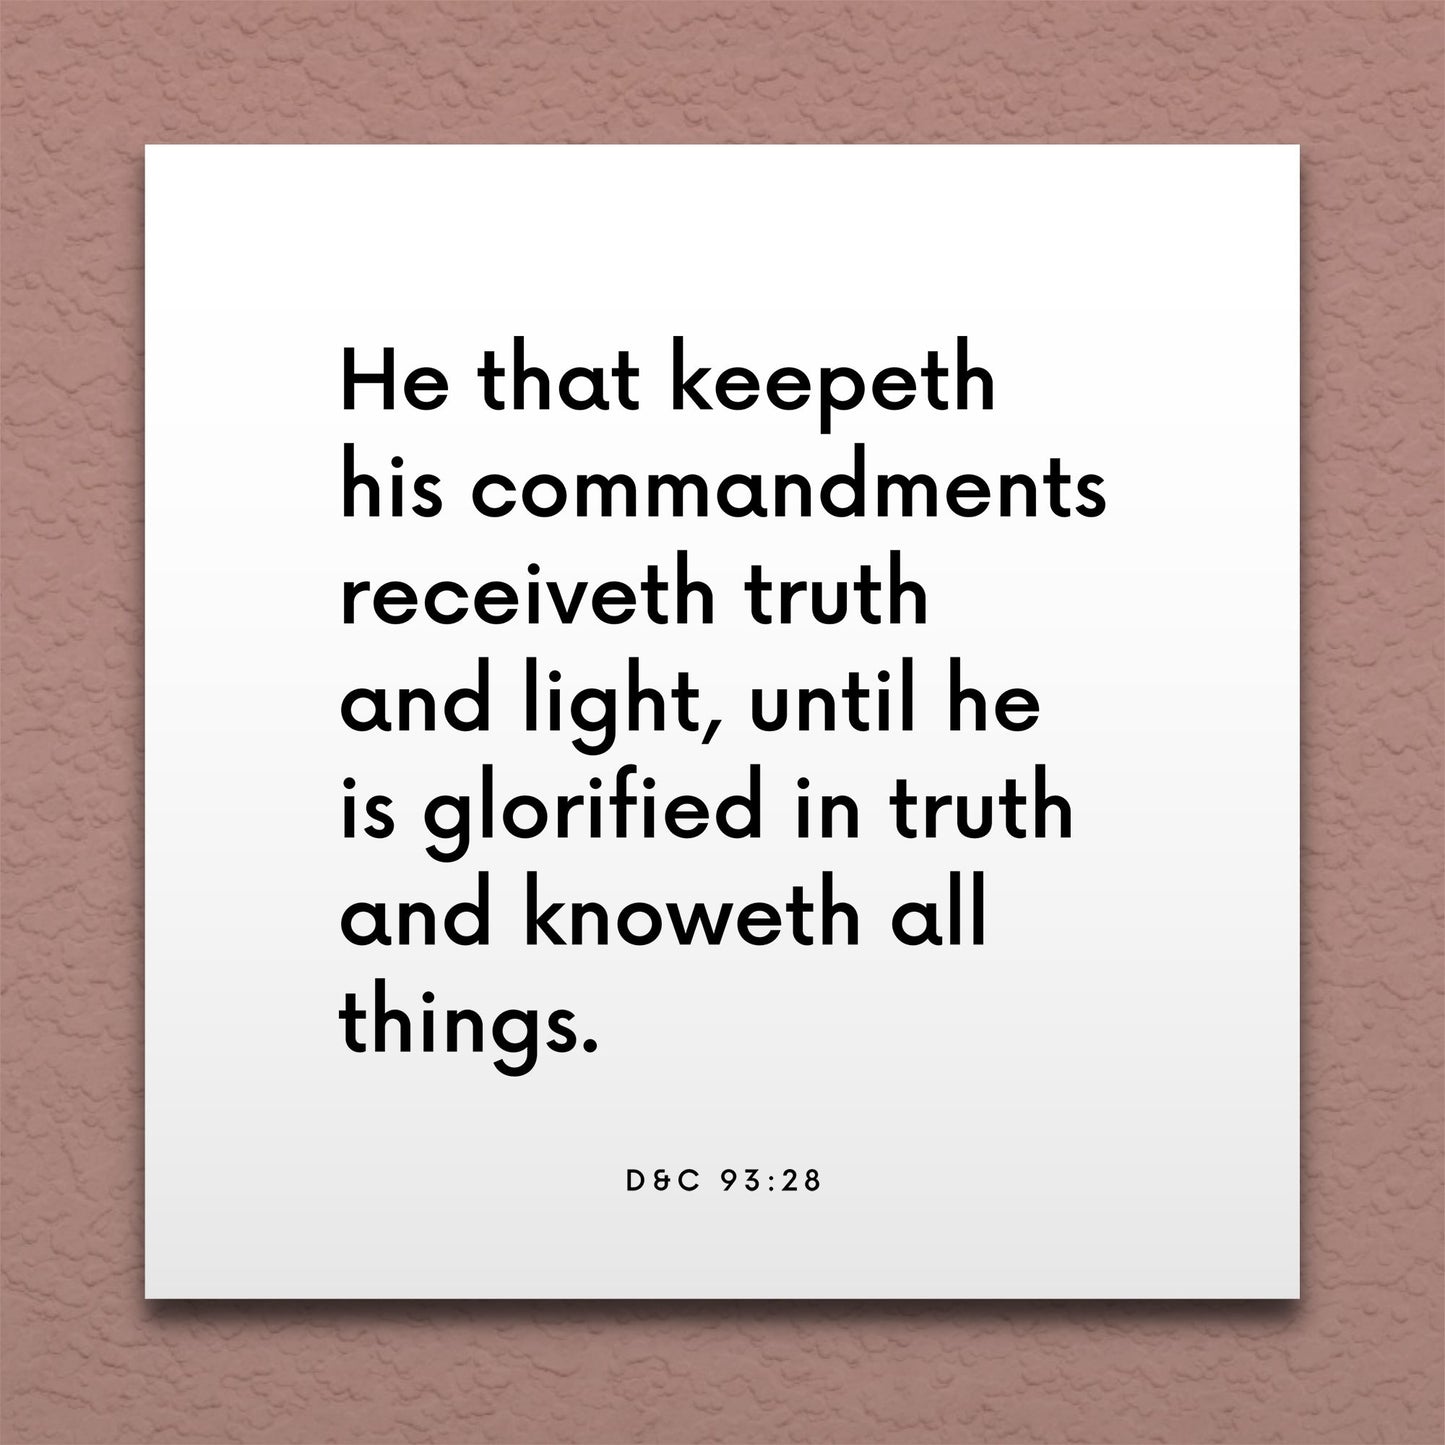 Wall-mounted scripture tile for D&C 93:28 - "He that keepeth his commandments receiveth truth and light"